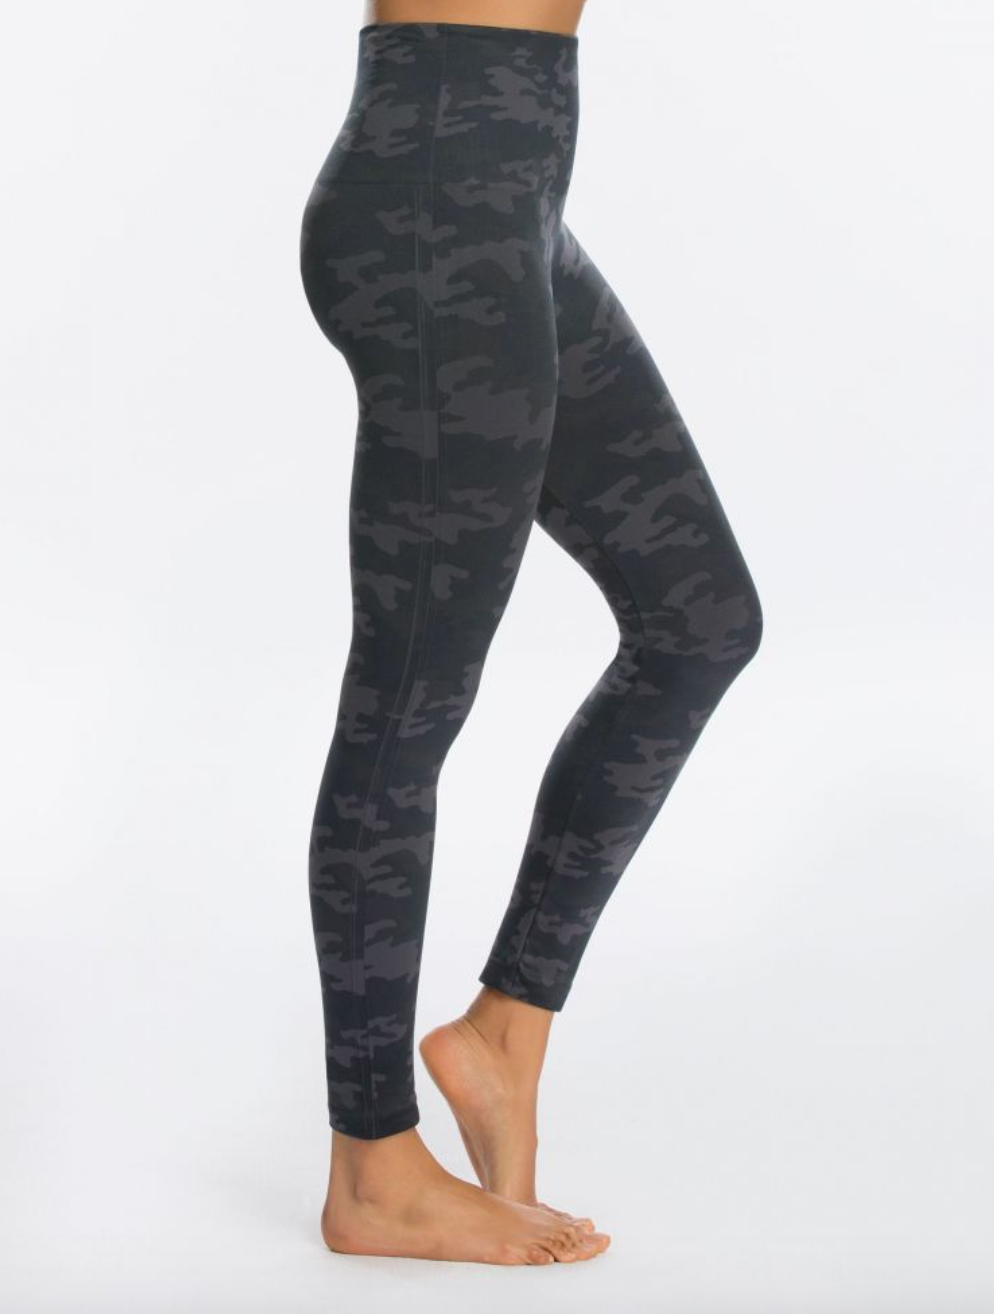 SPANX Black Camo “Look At Me Now” Seamless Cropped Leggings Women’s Size  Small 